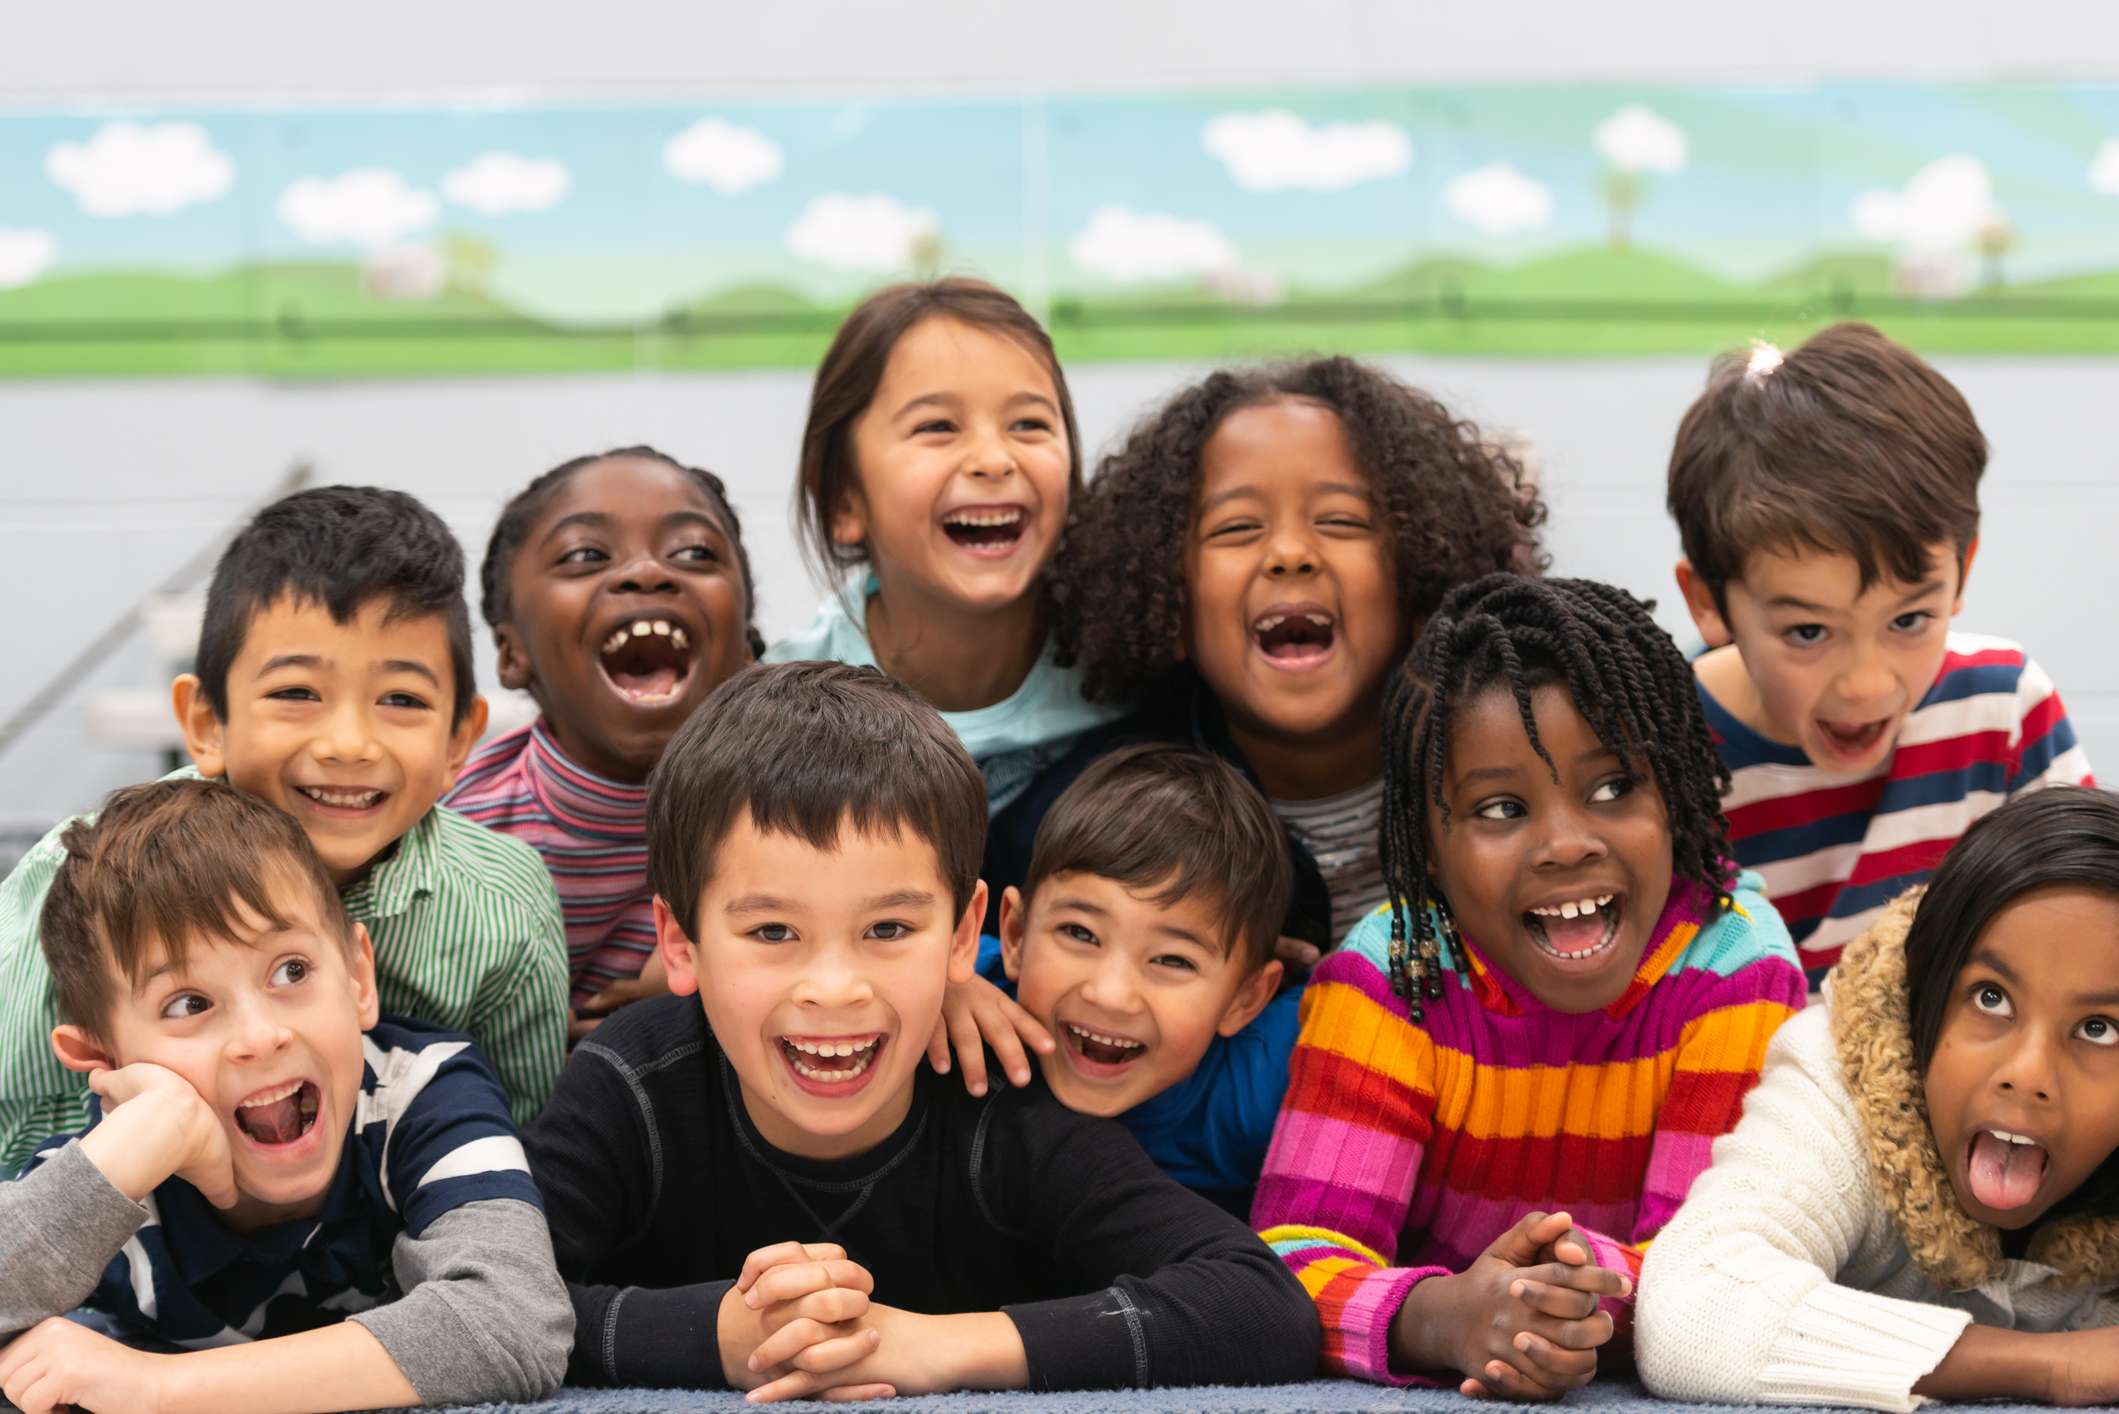 A group of diverse kids smile in this portrait. They are stacked on top of each other while cuddling in close and showing how happy they are.